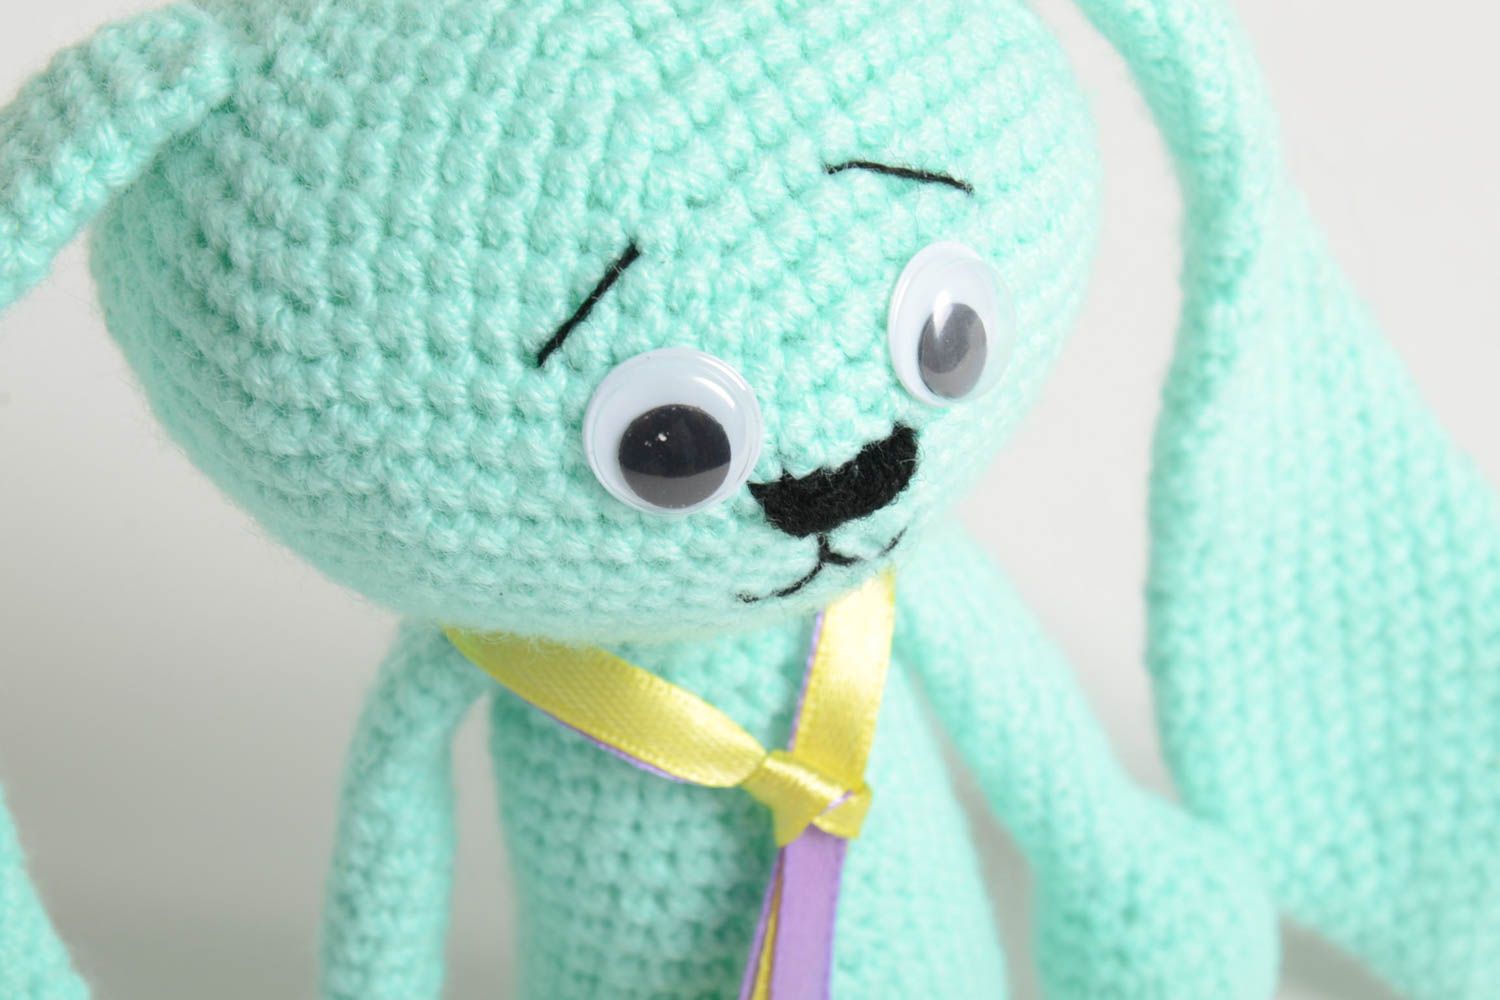 Beautiful handmade crochet soft toy stuffed toy best toys for kids gift ideas photo 3